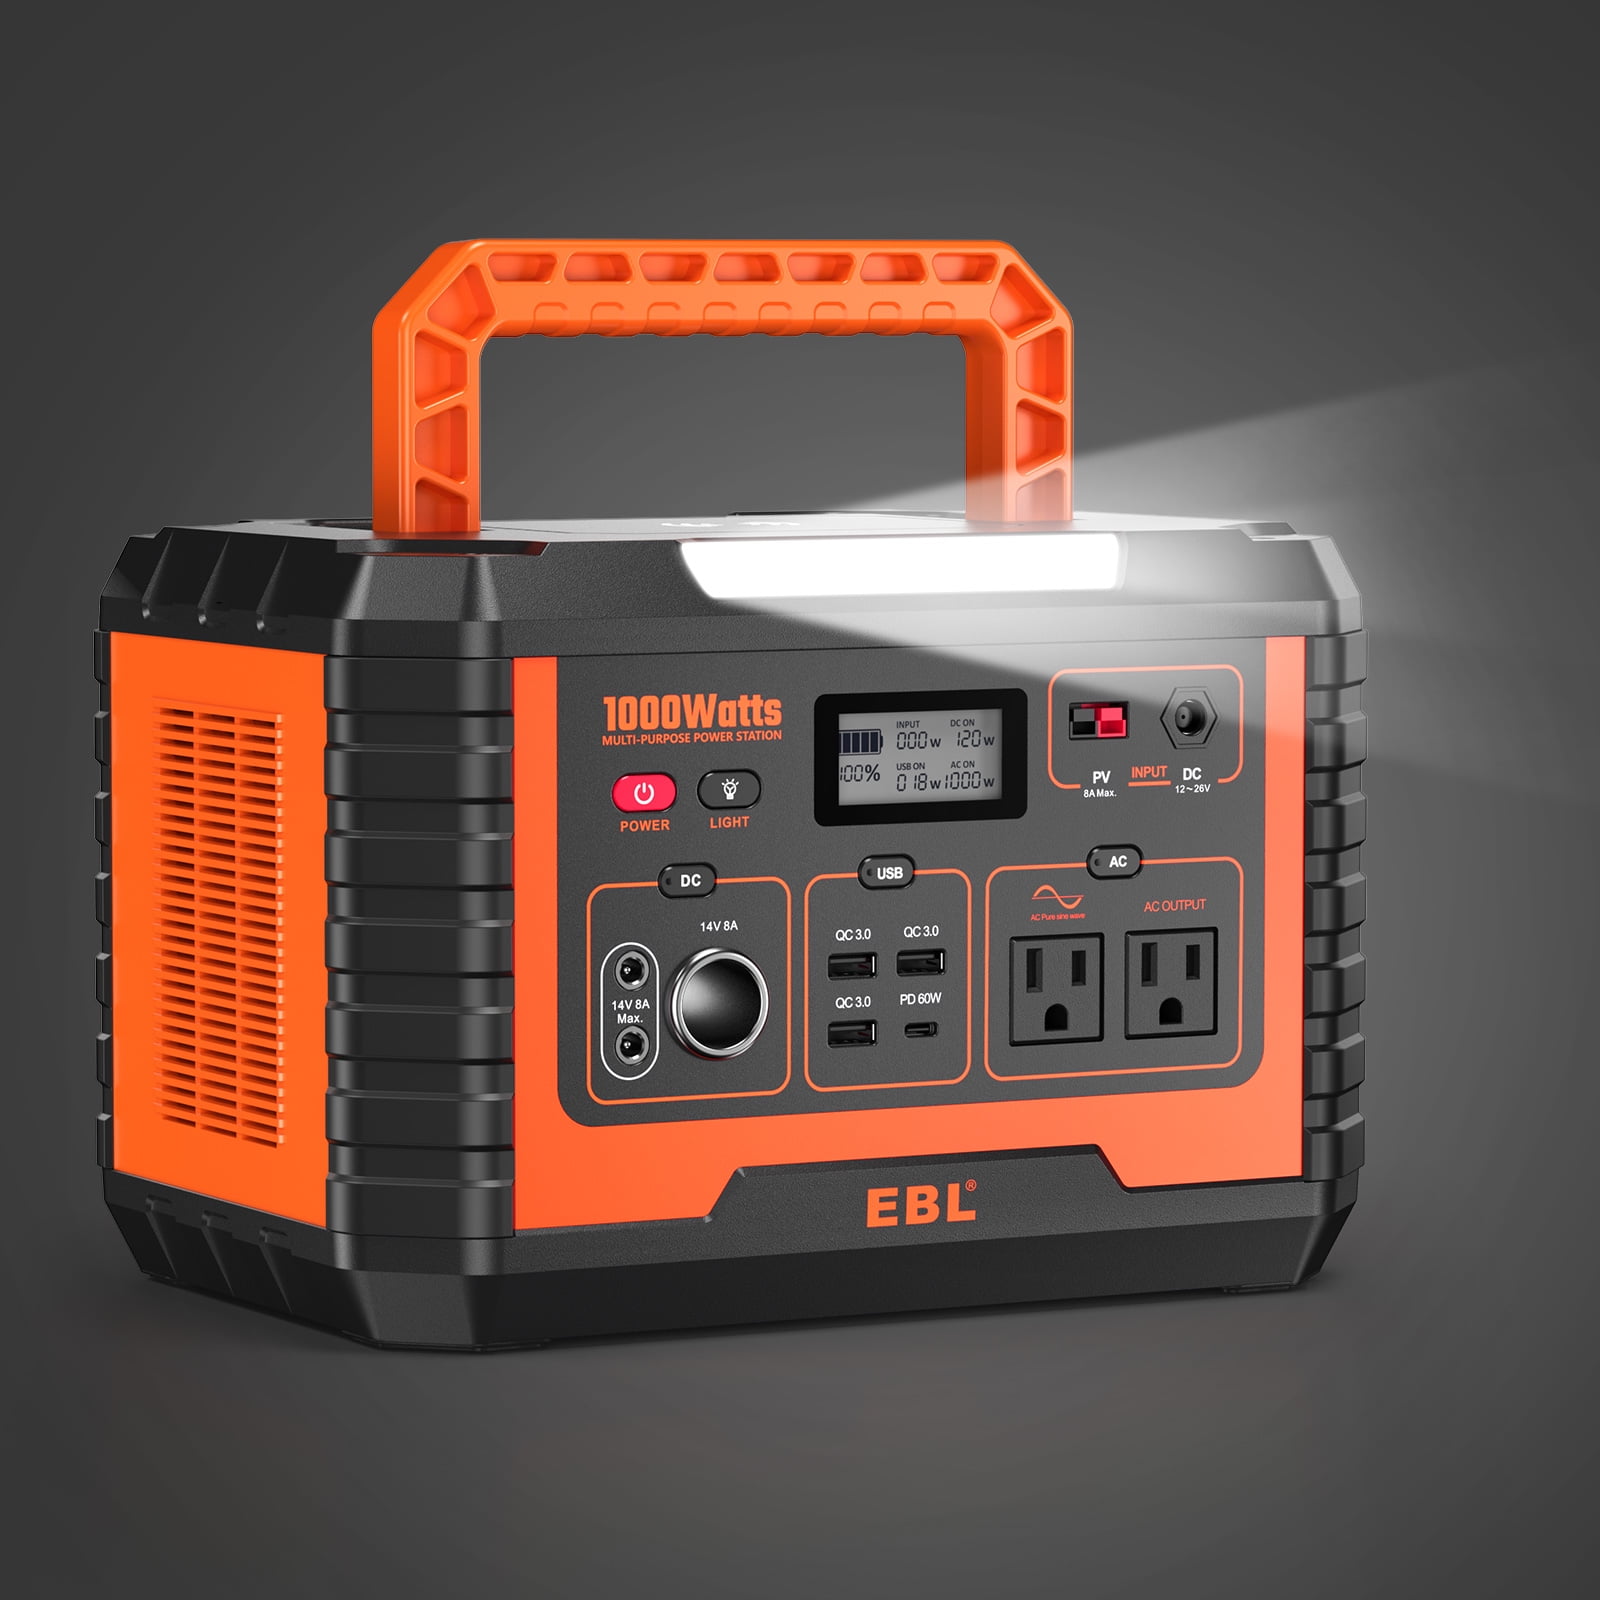 EBL Portable Power Station 1000W, 999Wh Capacity, Solar Generator, AC  Output for Outdoor Camping, Home Backup, Emergency, RV/Va